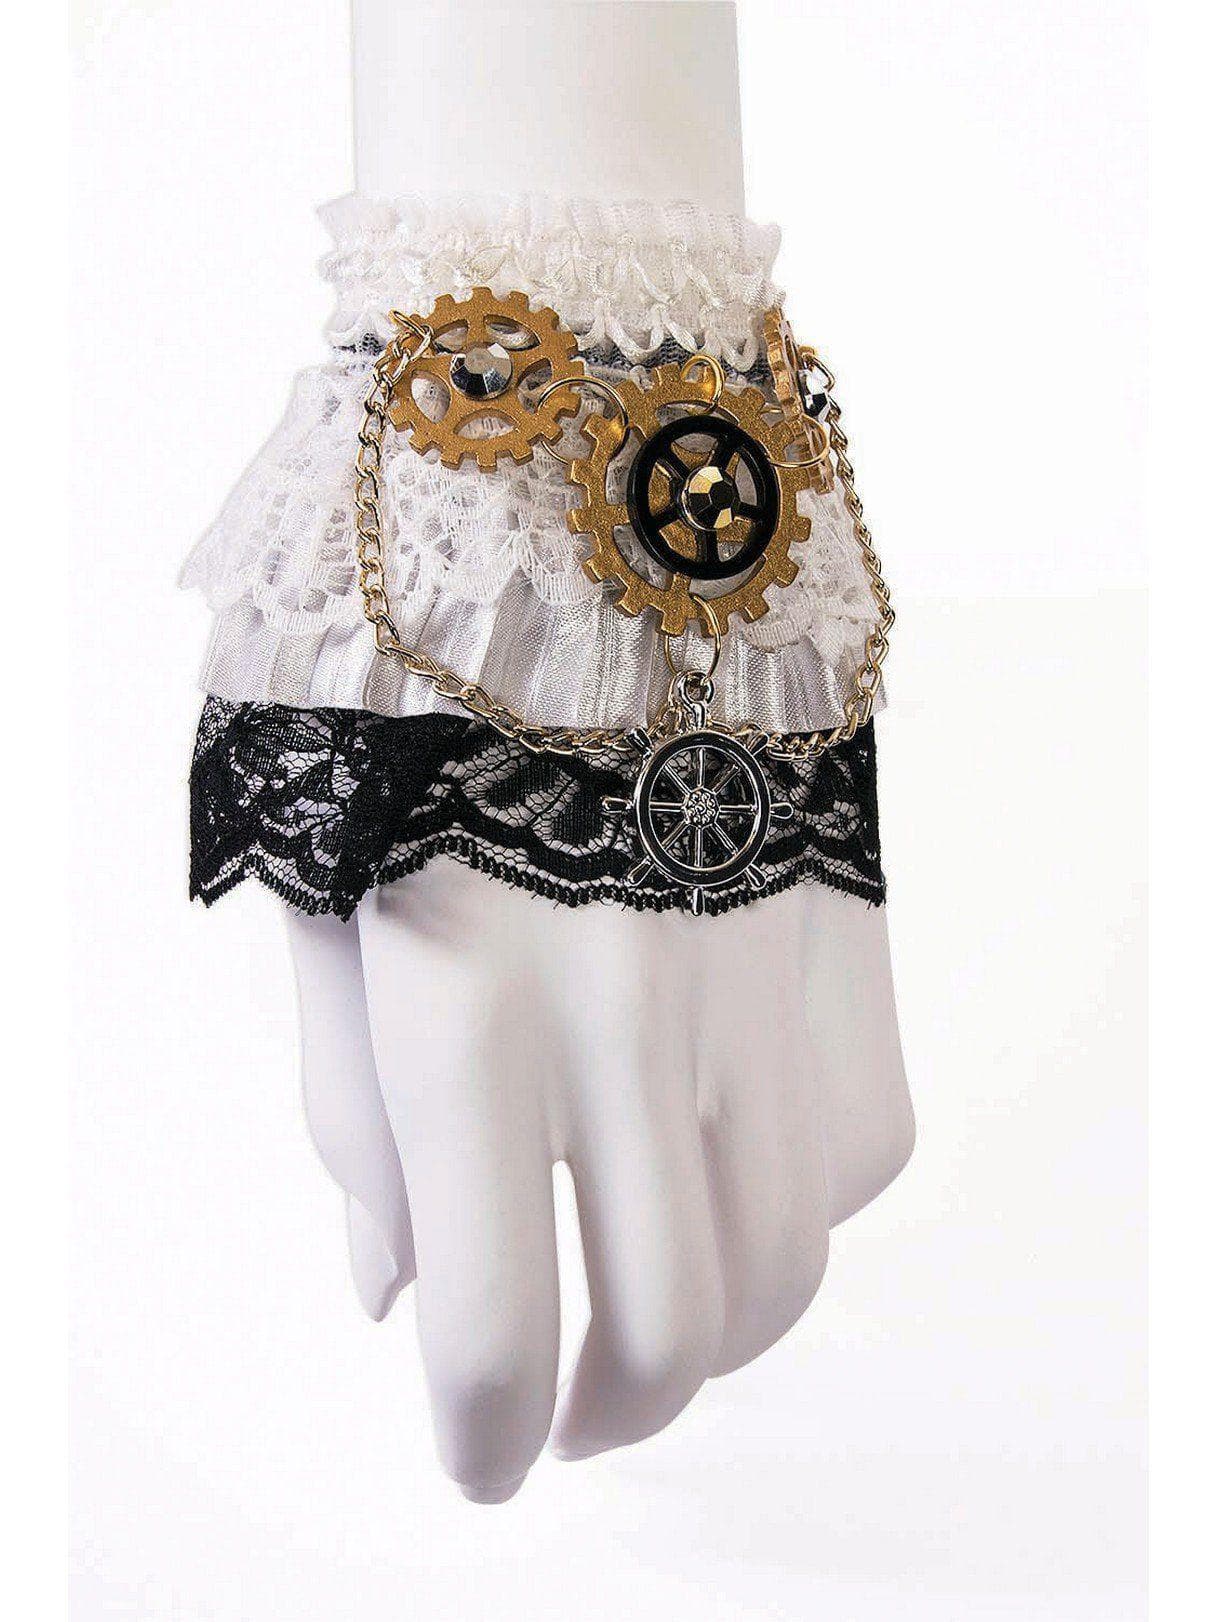 Adult Fancy Lace and Gear Steampunk Wrist Cuffs - costumes.com